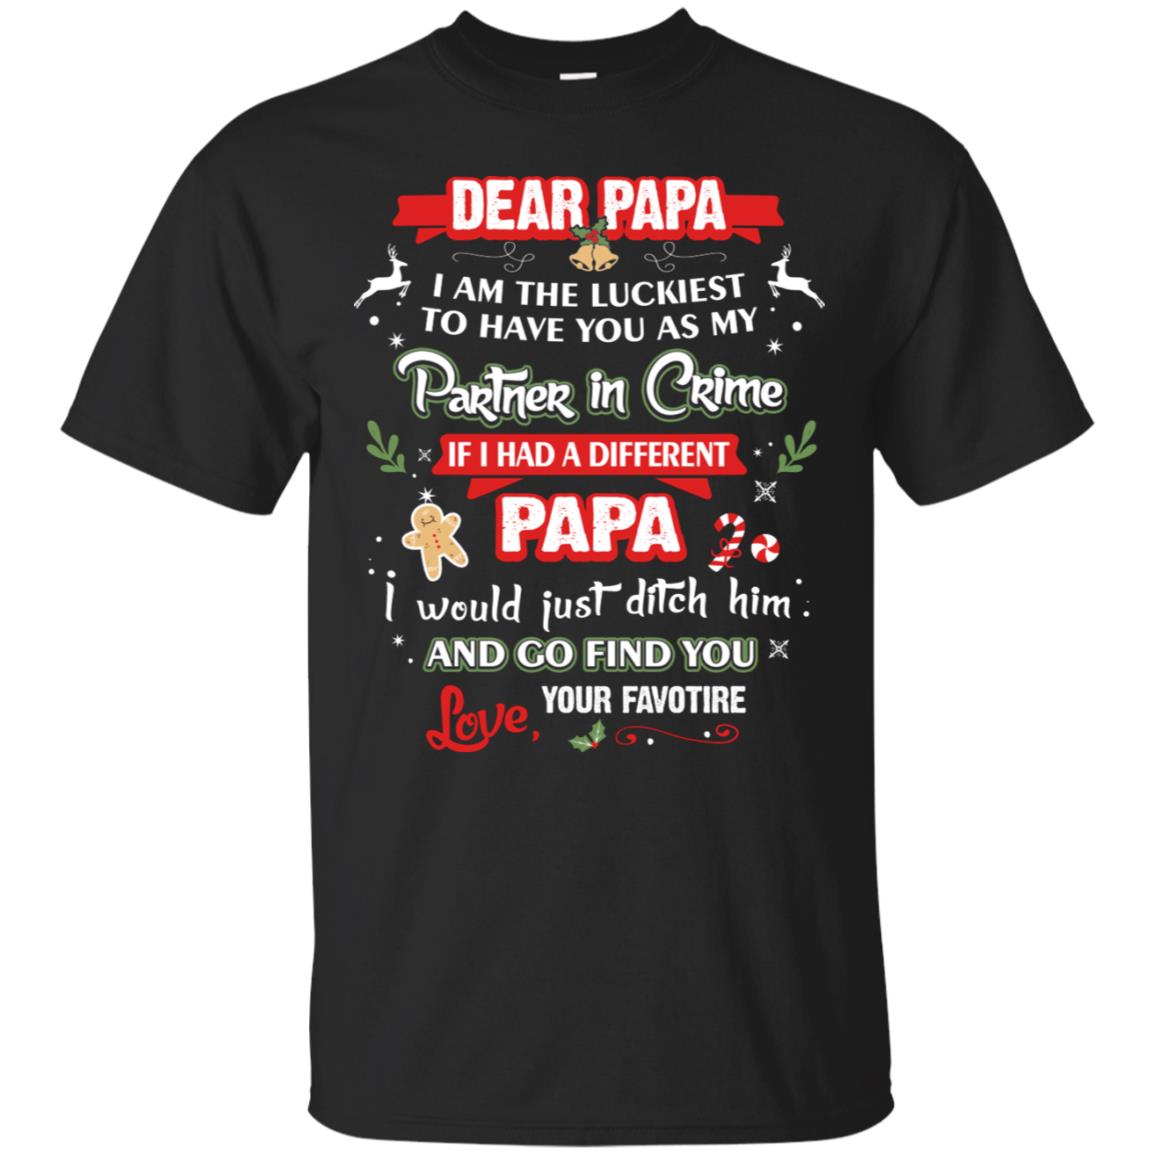 Dear Papa, I Am The Luckiest To Have You As My Partner In Crime If I Had A Different Papai Would Just Ditch He And Go Find You Love Your FavoriteG200 Gildan Ultra Cotton T-Shirt